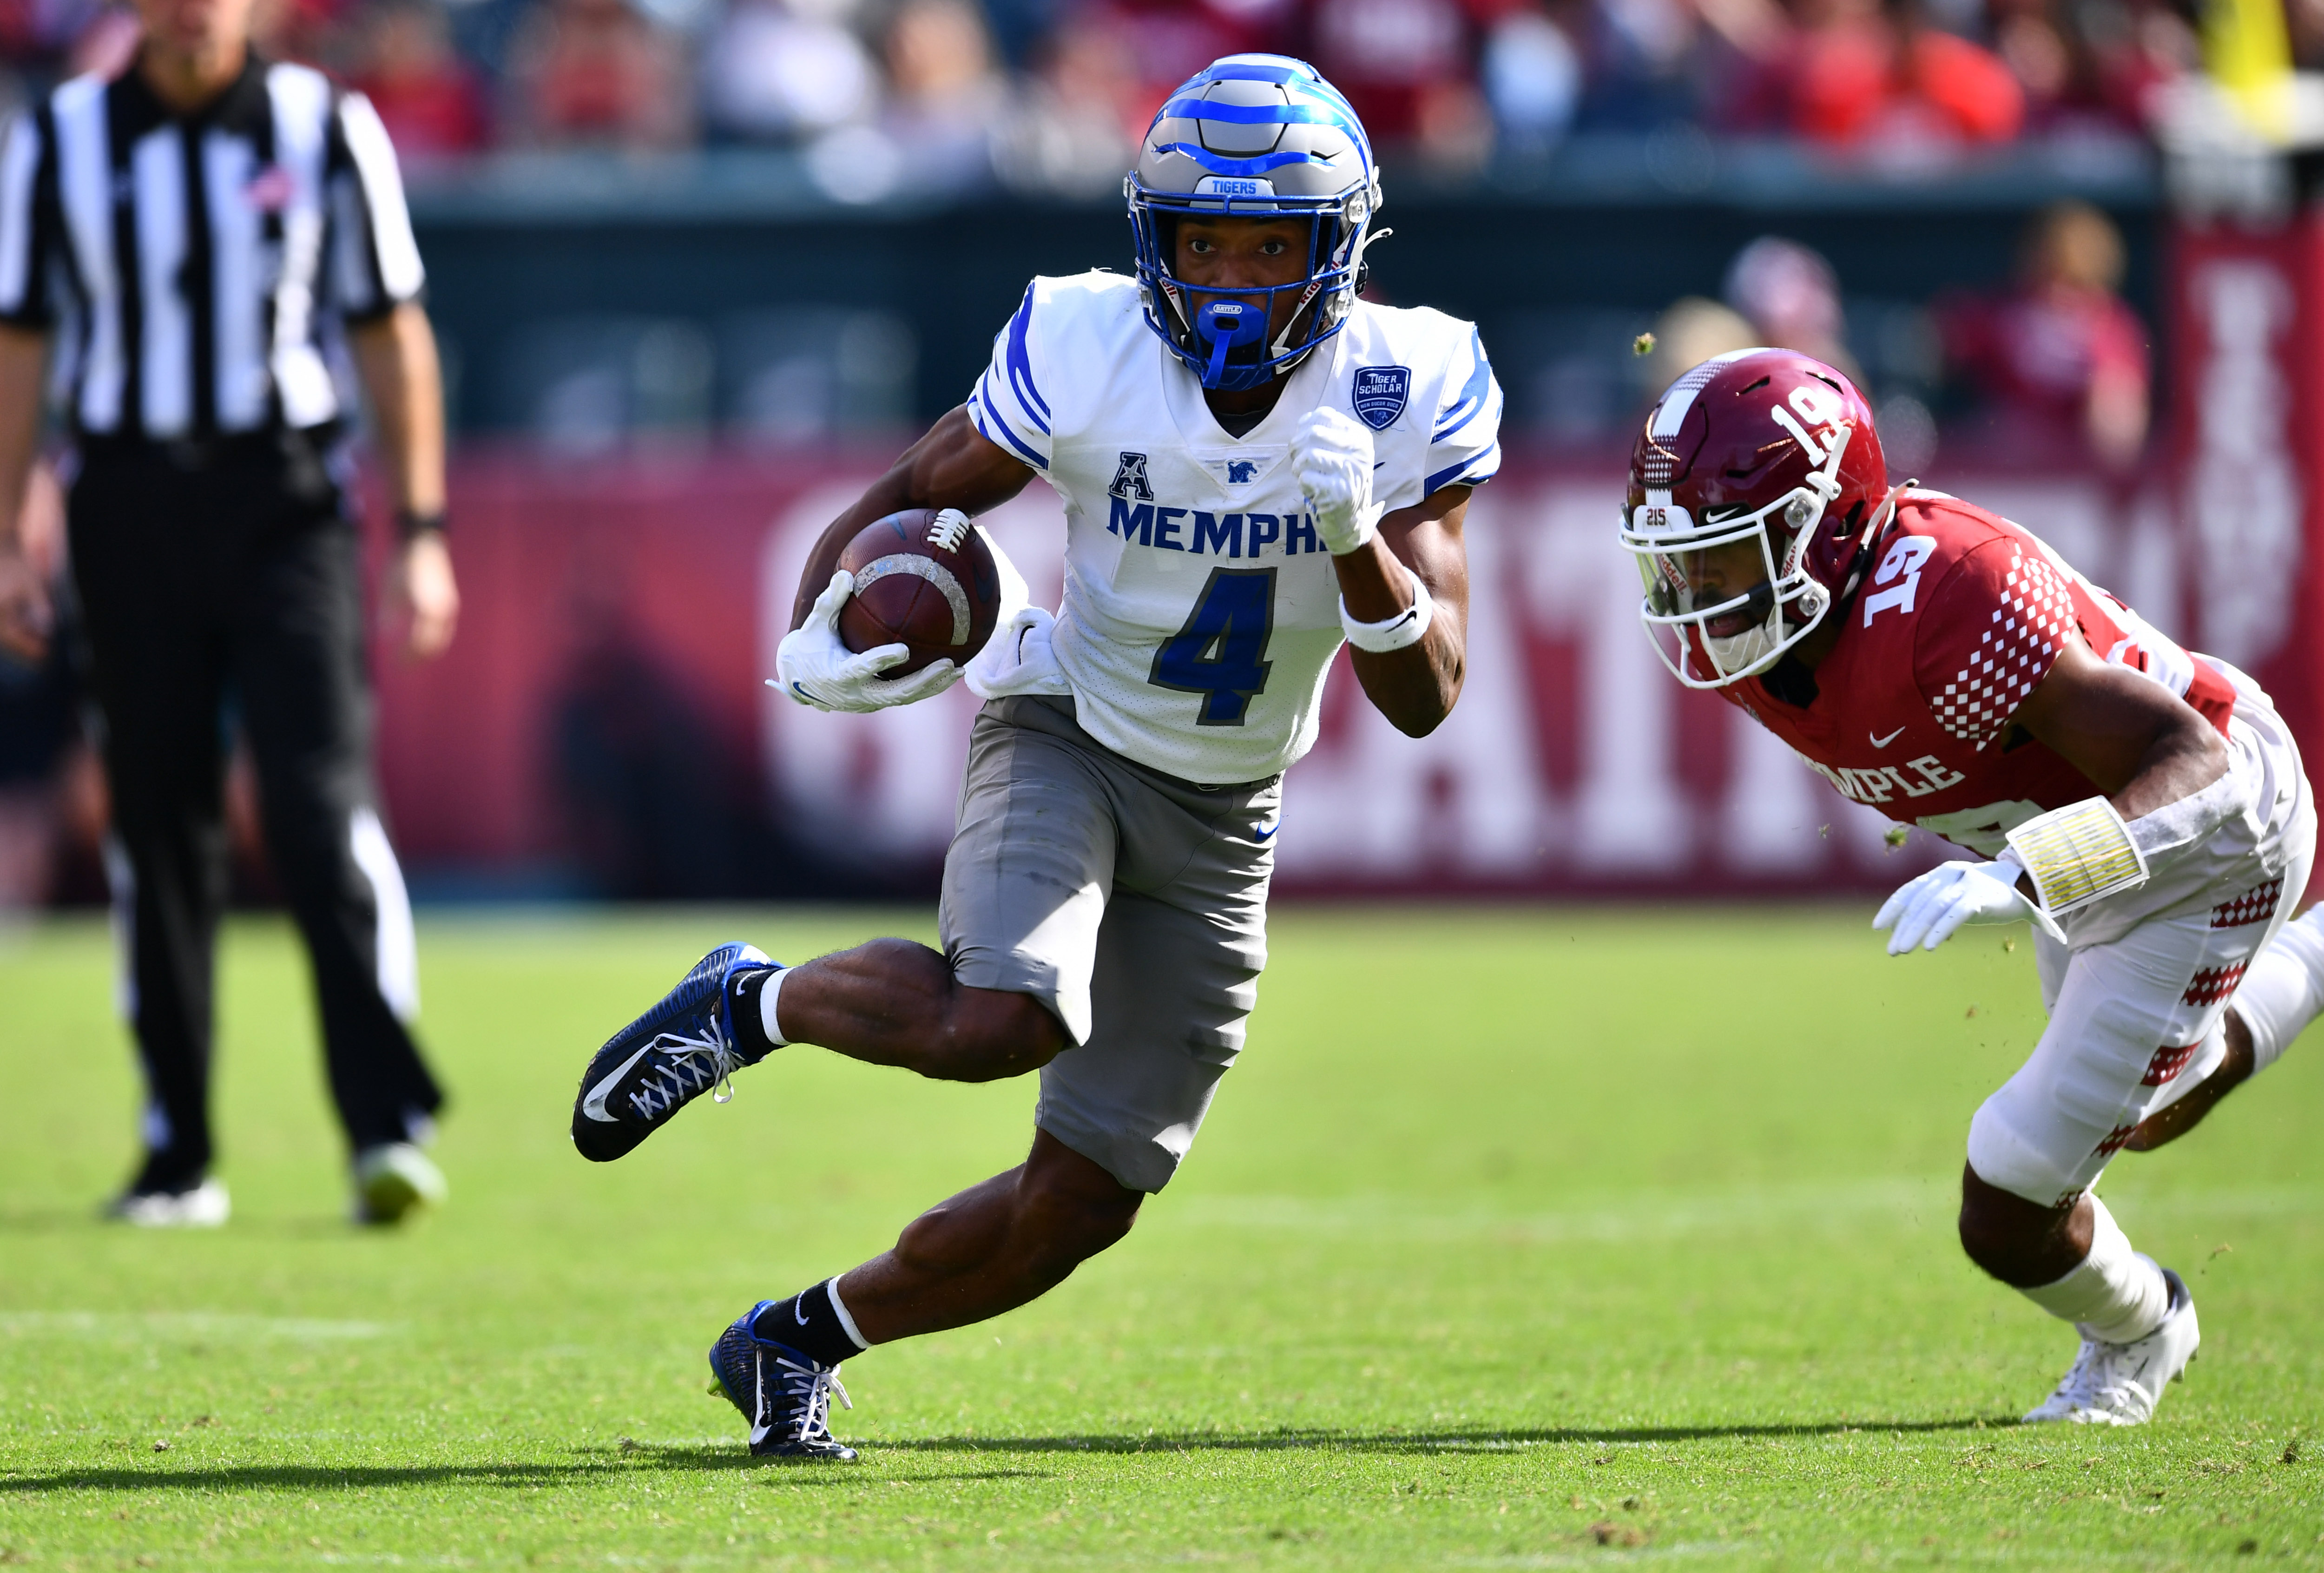 Oct 2, 2021; Philadelphia, Pennsylvania, USA; Memphis Tigers wide receiver Calvin Austin III (4) carries the ball in the second half against the Temple Owls at Lincoln Financial Field. Mandatory Credit: Kyle Ross-USA TODAY Sports